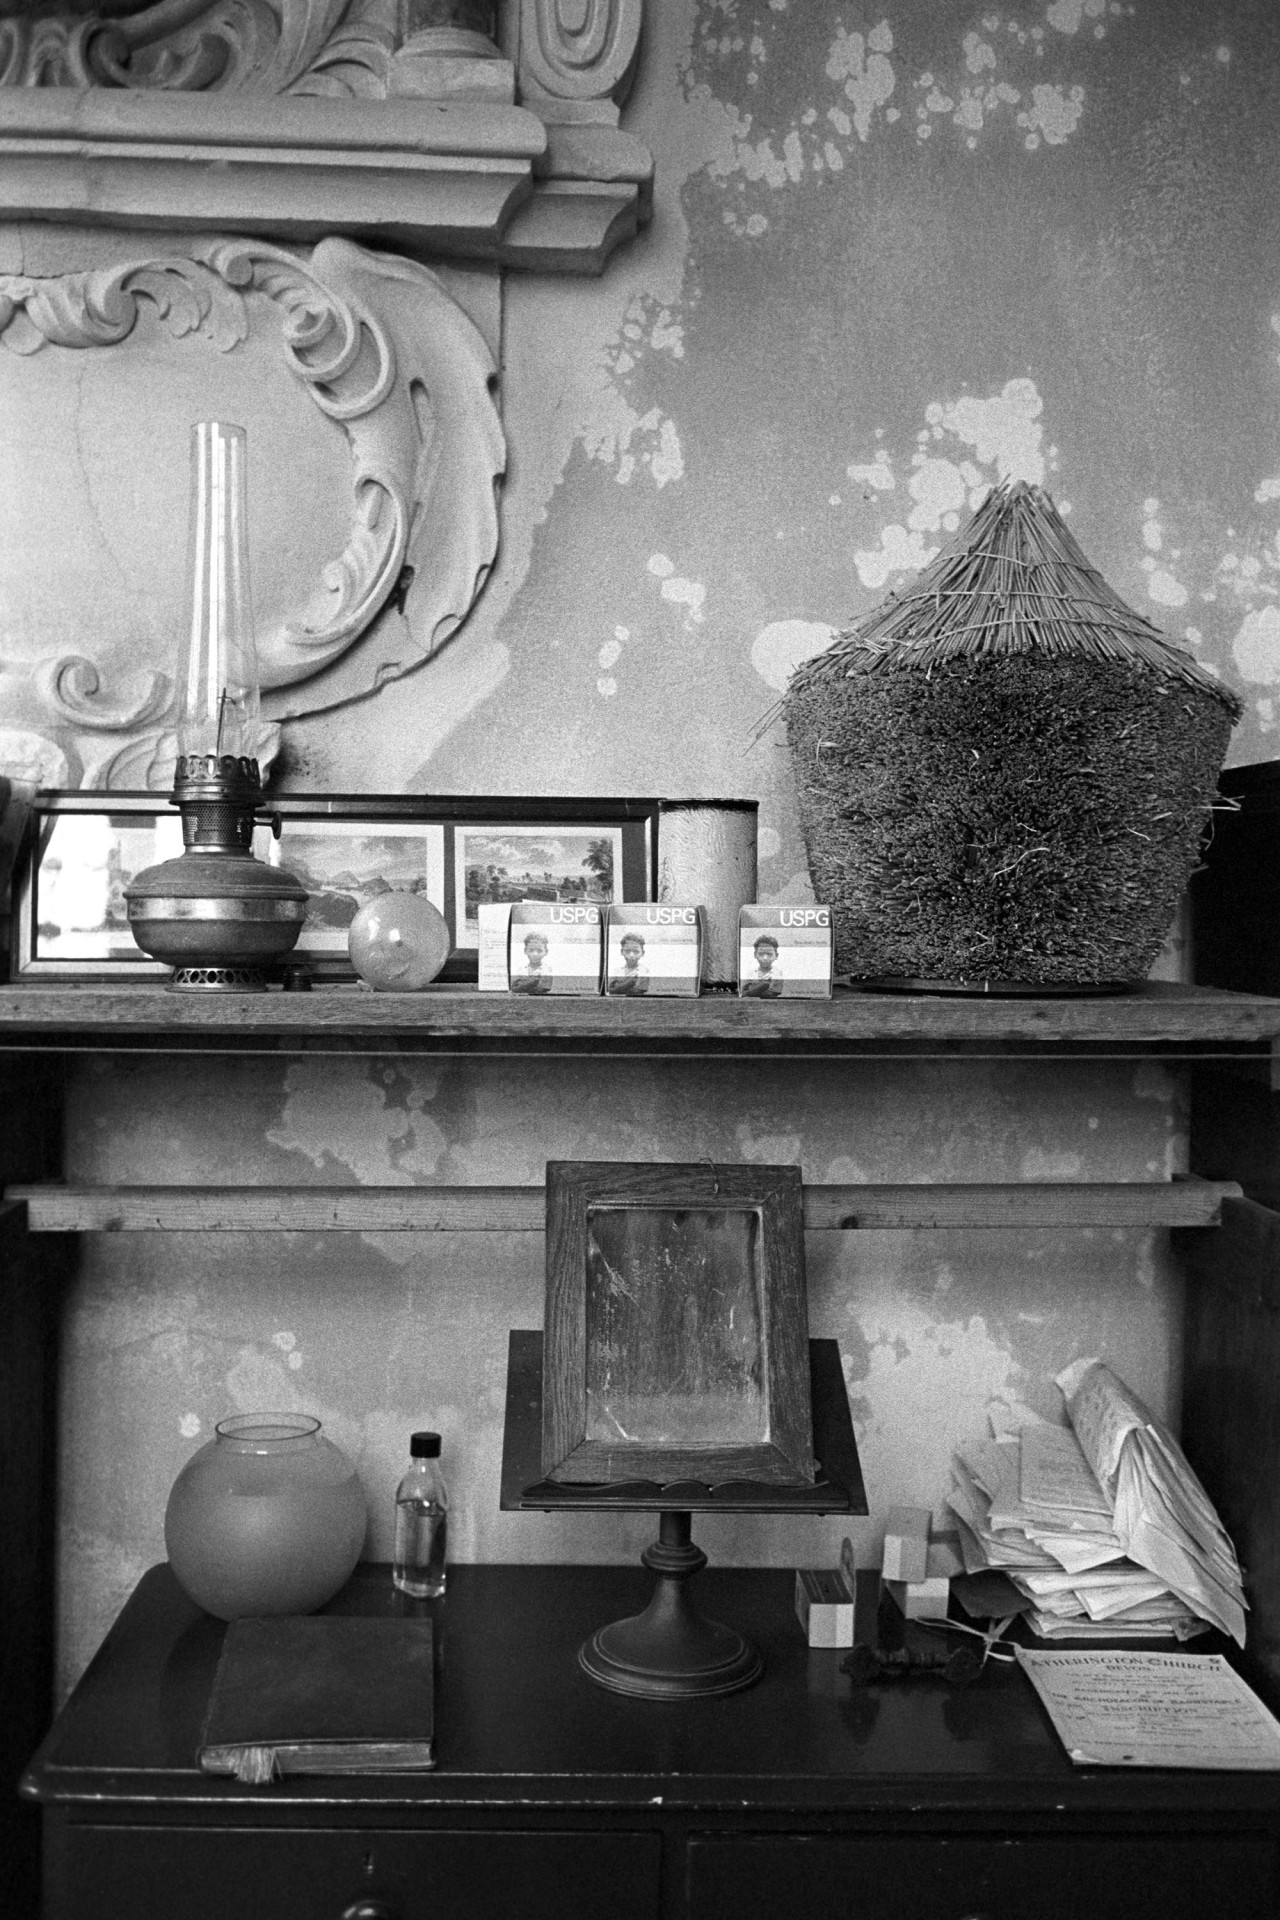 Interior of church vestry, with oil lamp, mirror, and small model rick for Harvest Festivals.
[Desk and shelf in Atherington Church vestry with an oil lamp, pictures, mirror, papers and model thatched wheat rick, amongst other items. Plasterwork can be seen on the wall behind, next to flaking paintwork.]